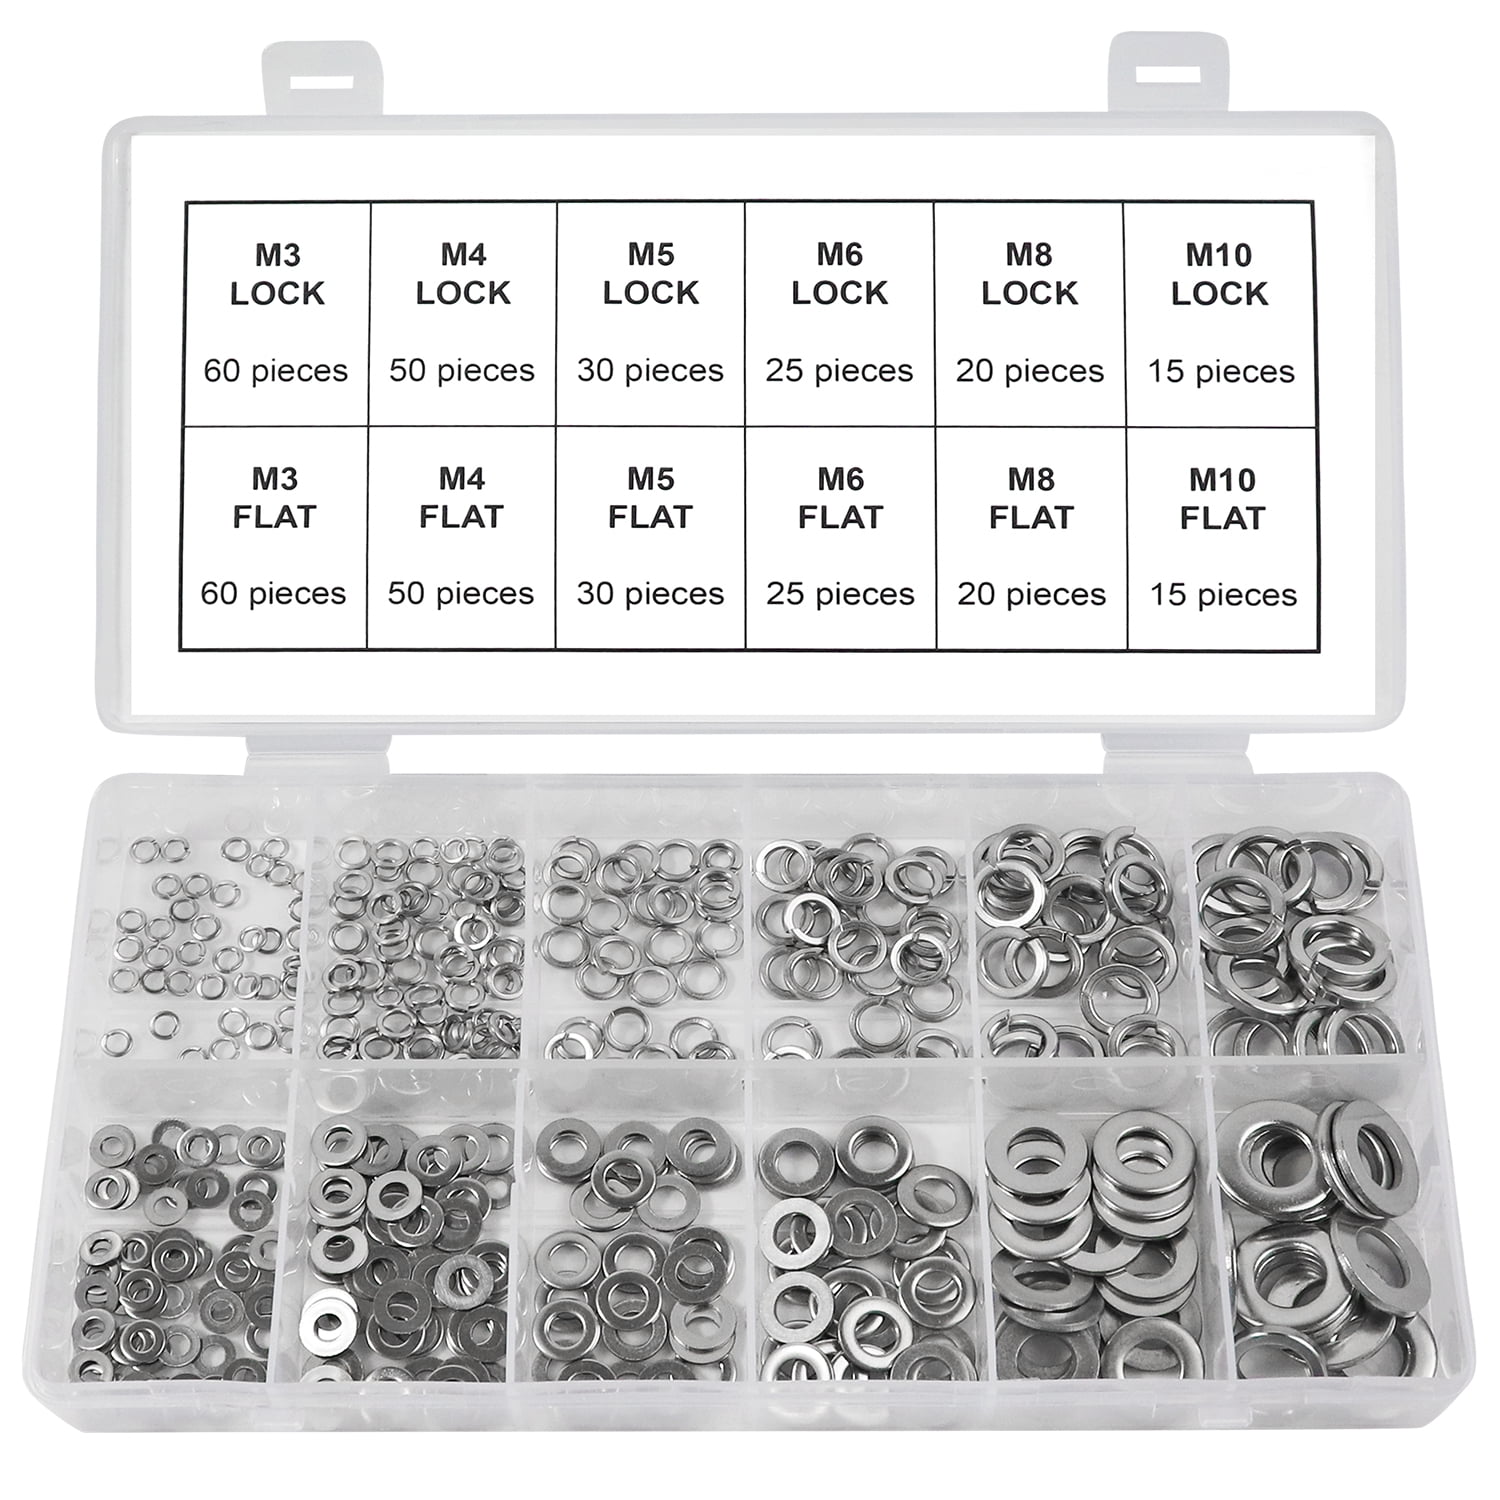 M6 Flat Washer Solid Steel Home Common Use Hardware Accessories Pack of 50 